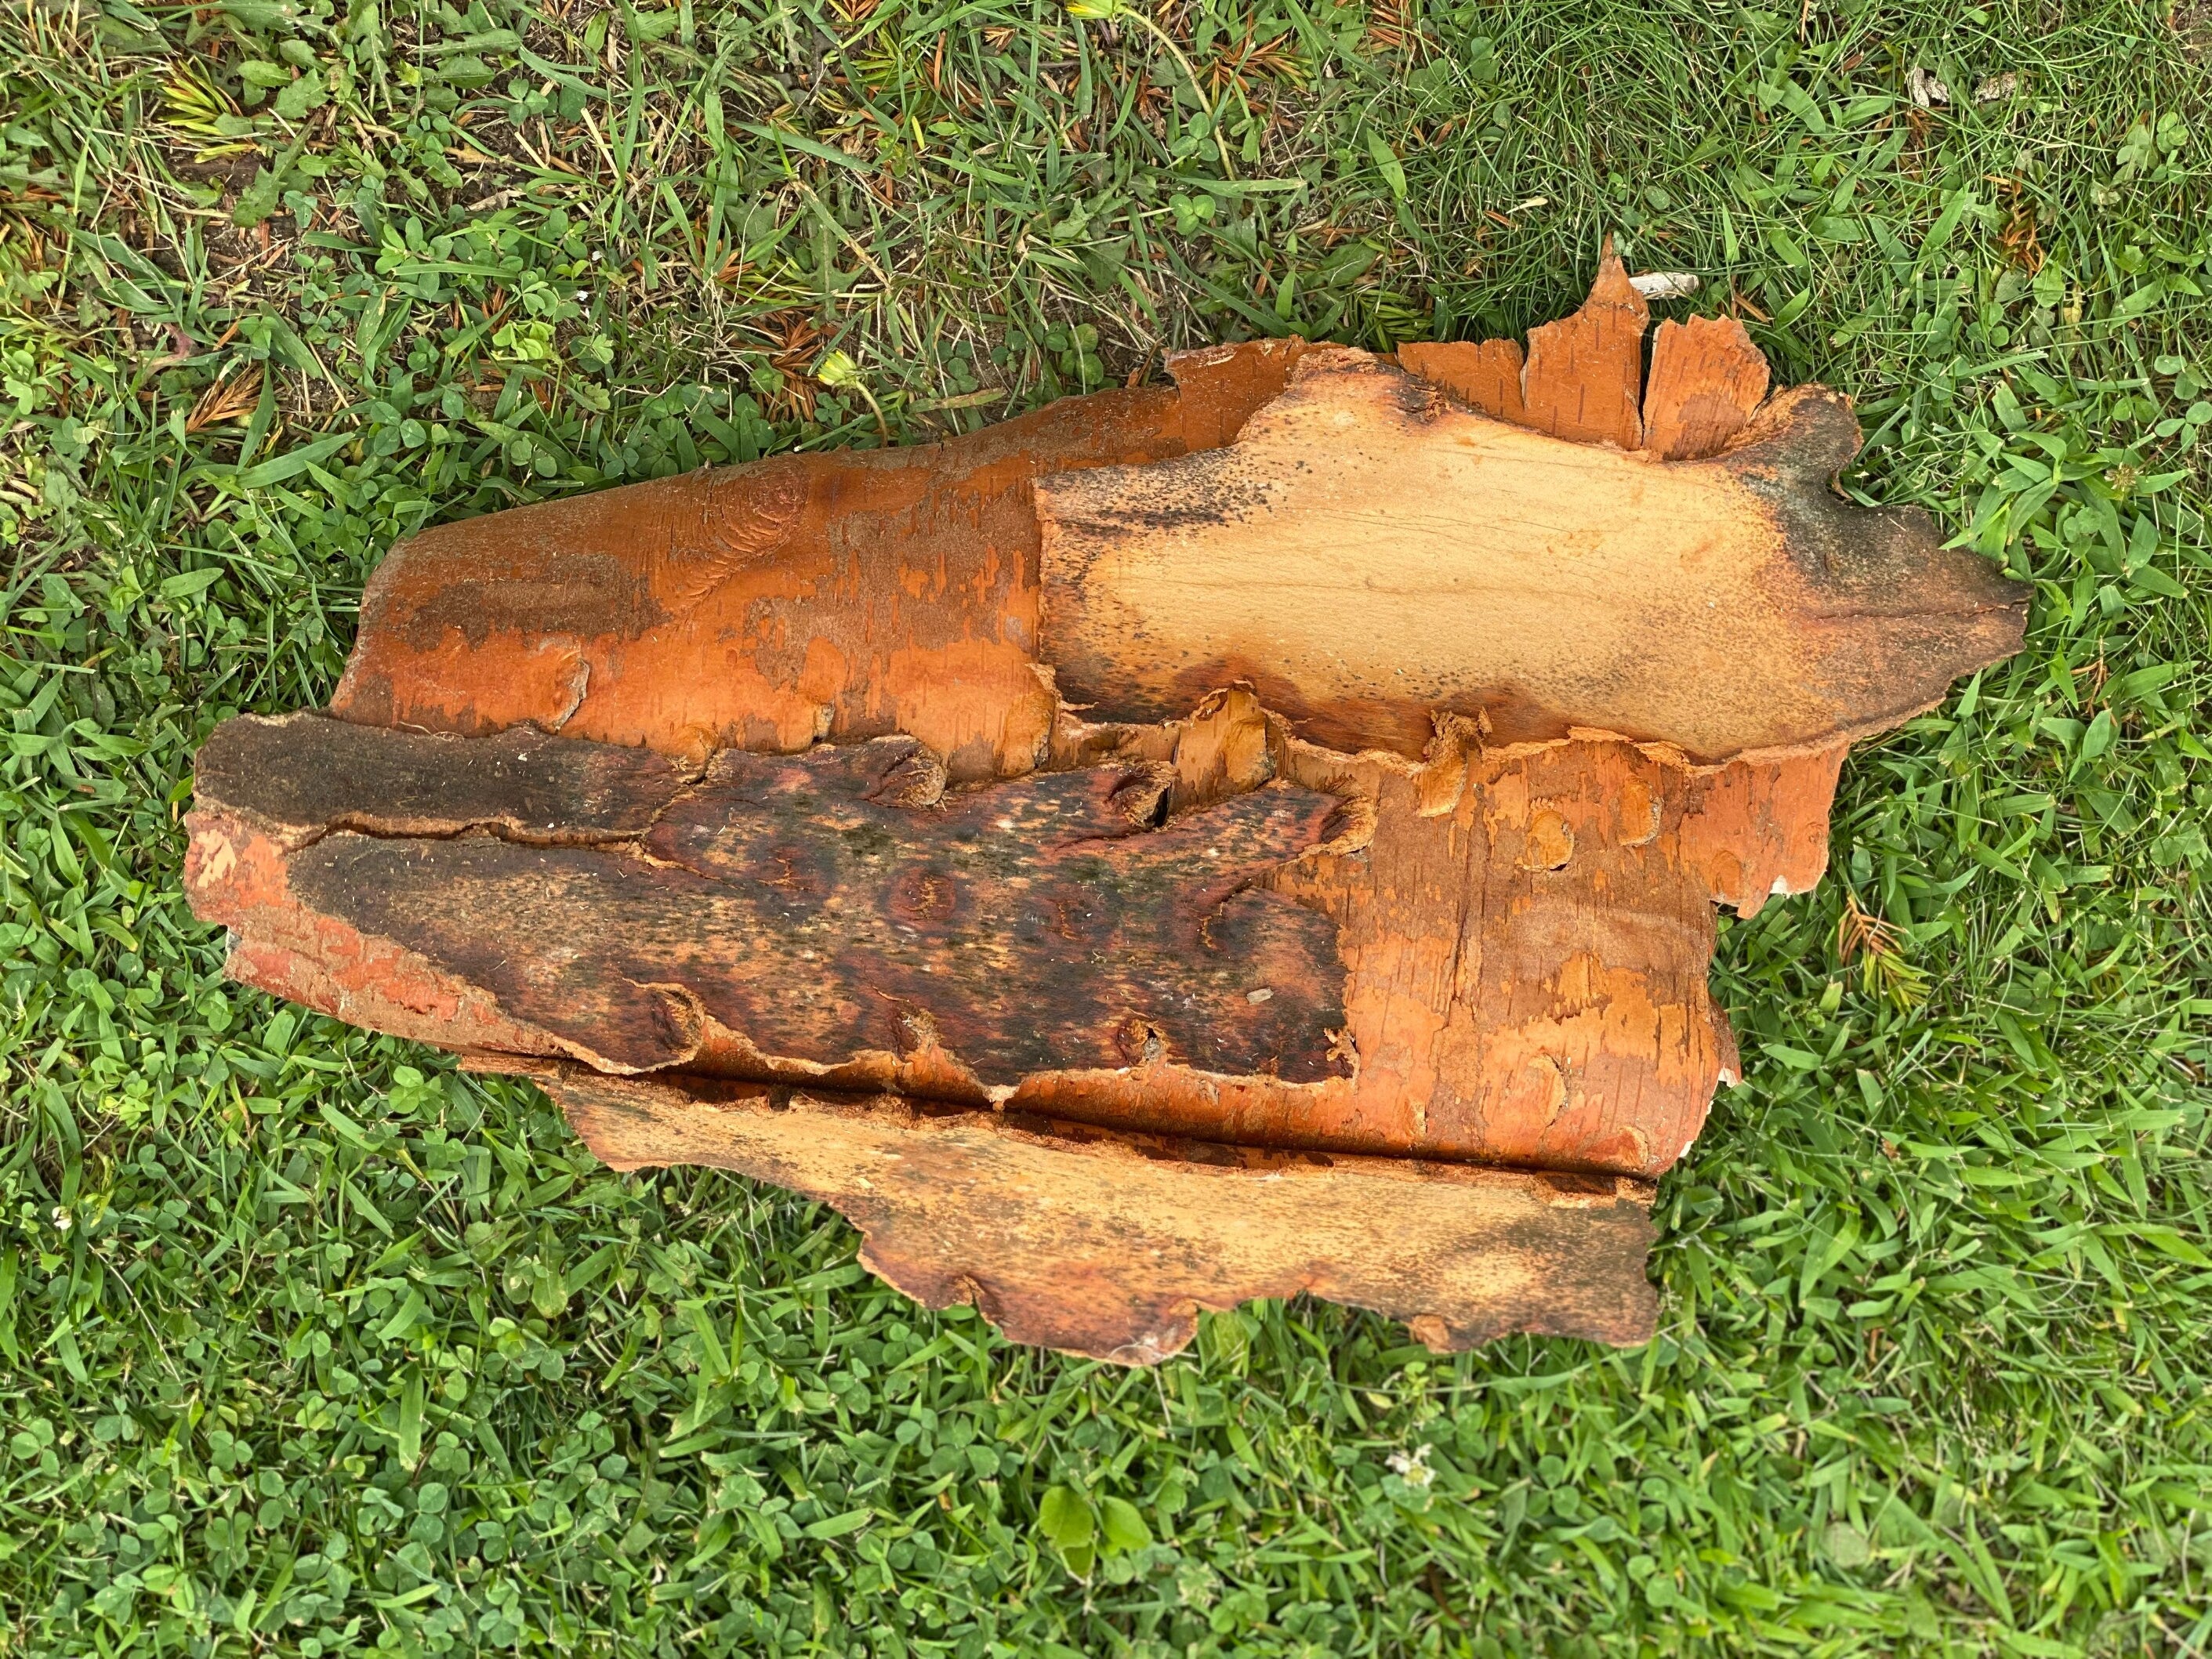 White Birch Bark, Approximately 20 Inches Long by 12 Inches Wide, Firm and Curly